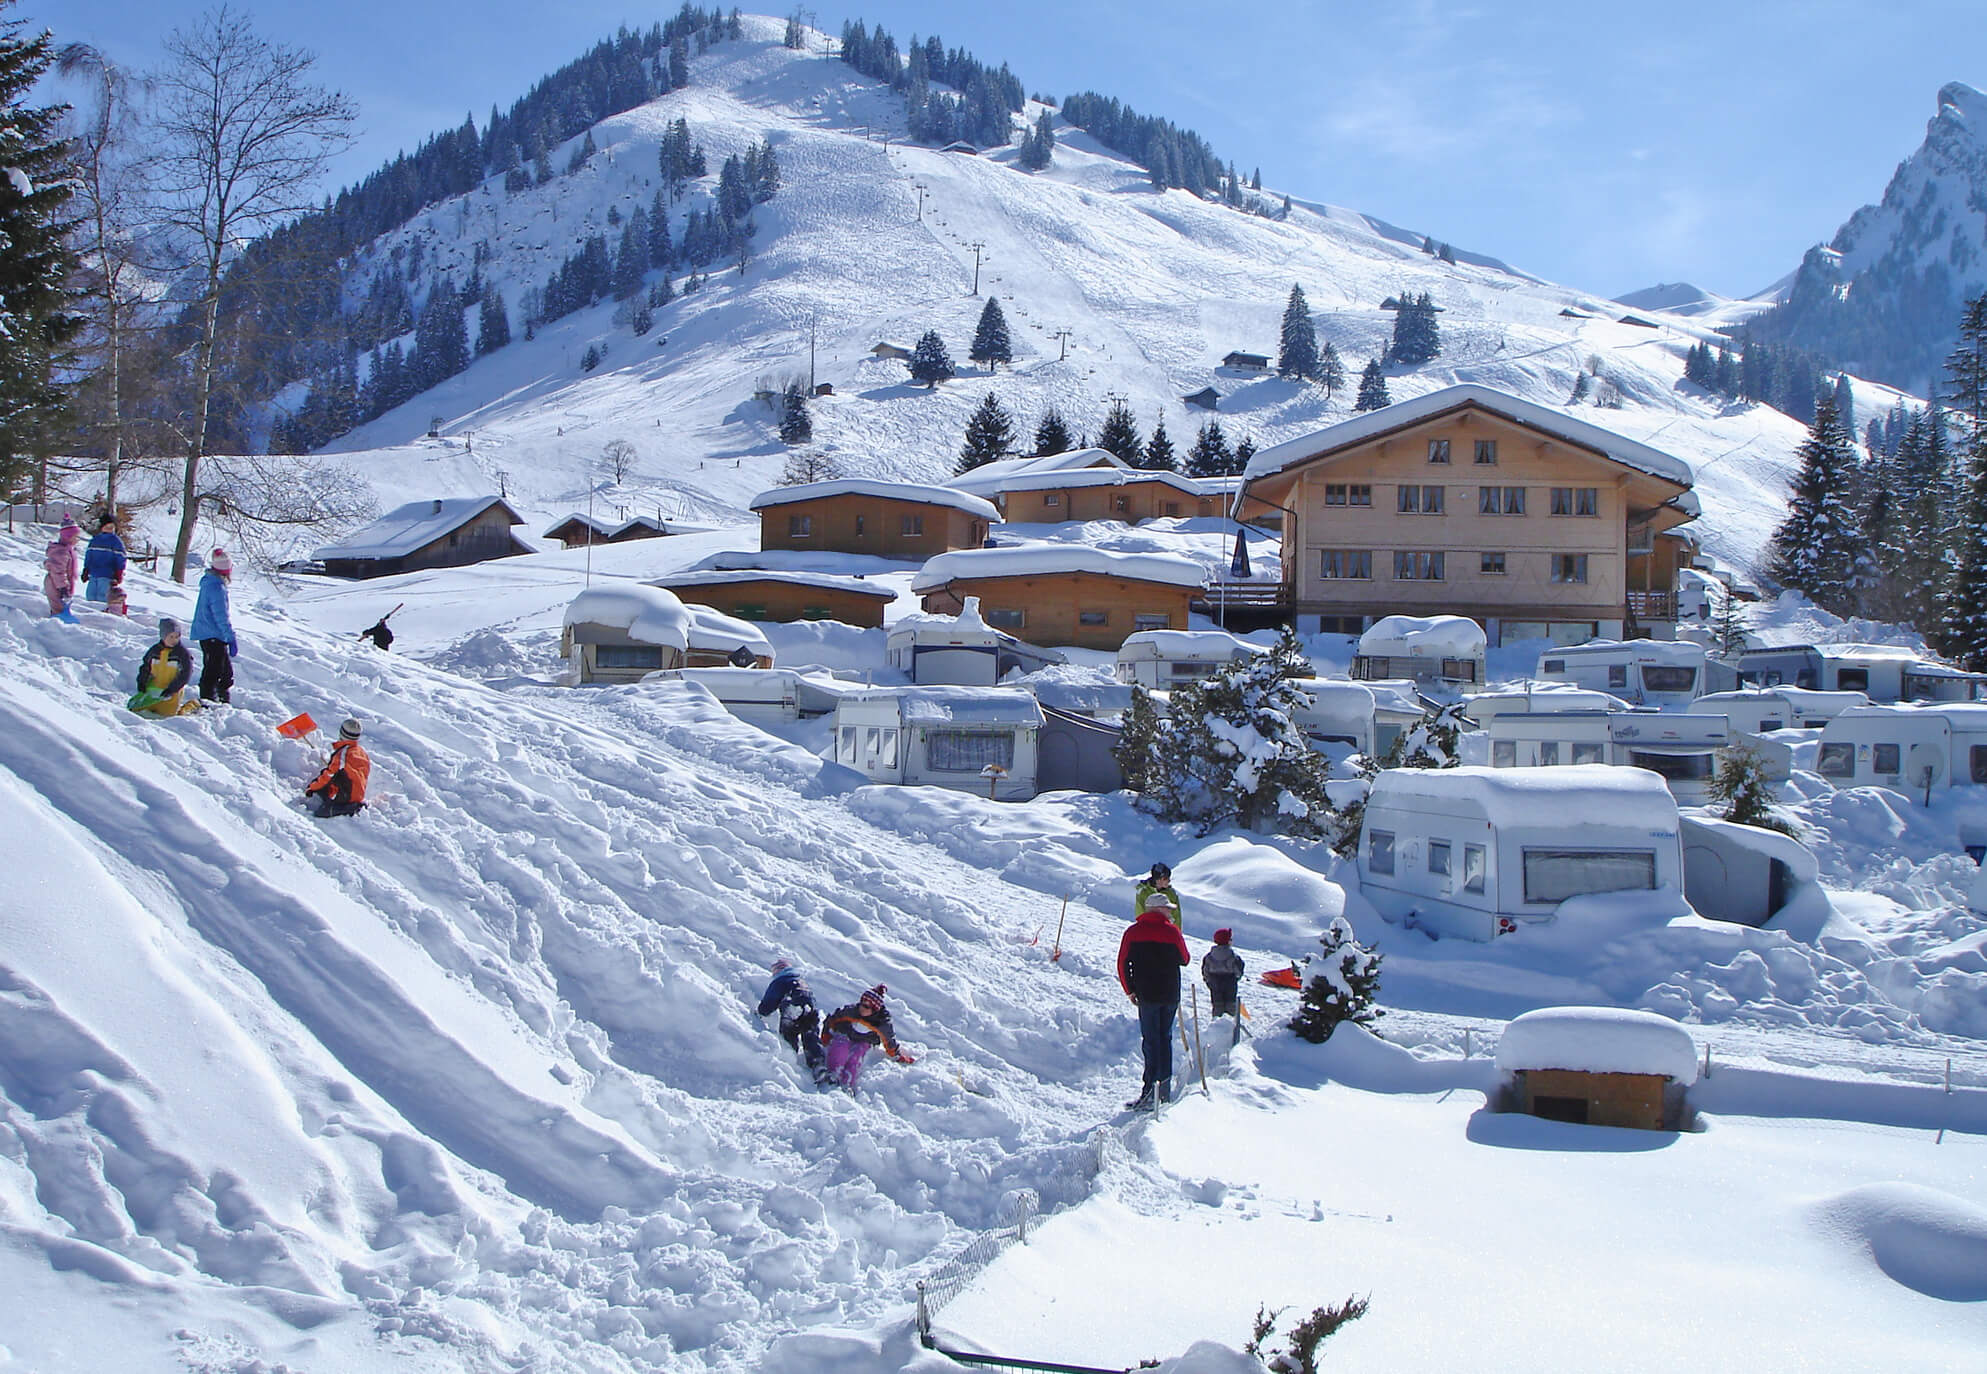 Camping Eggmatte in direct proximity to the Grimmialp ski area